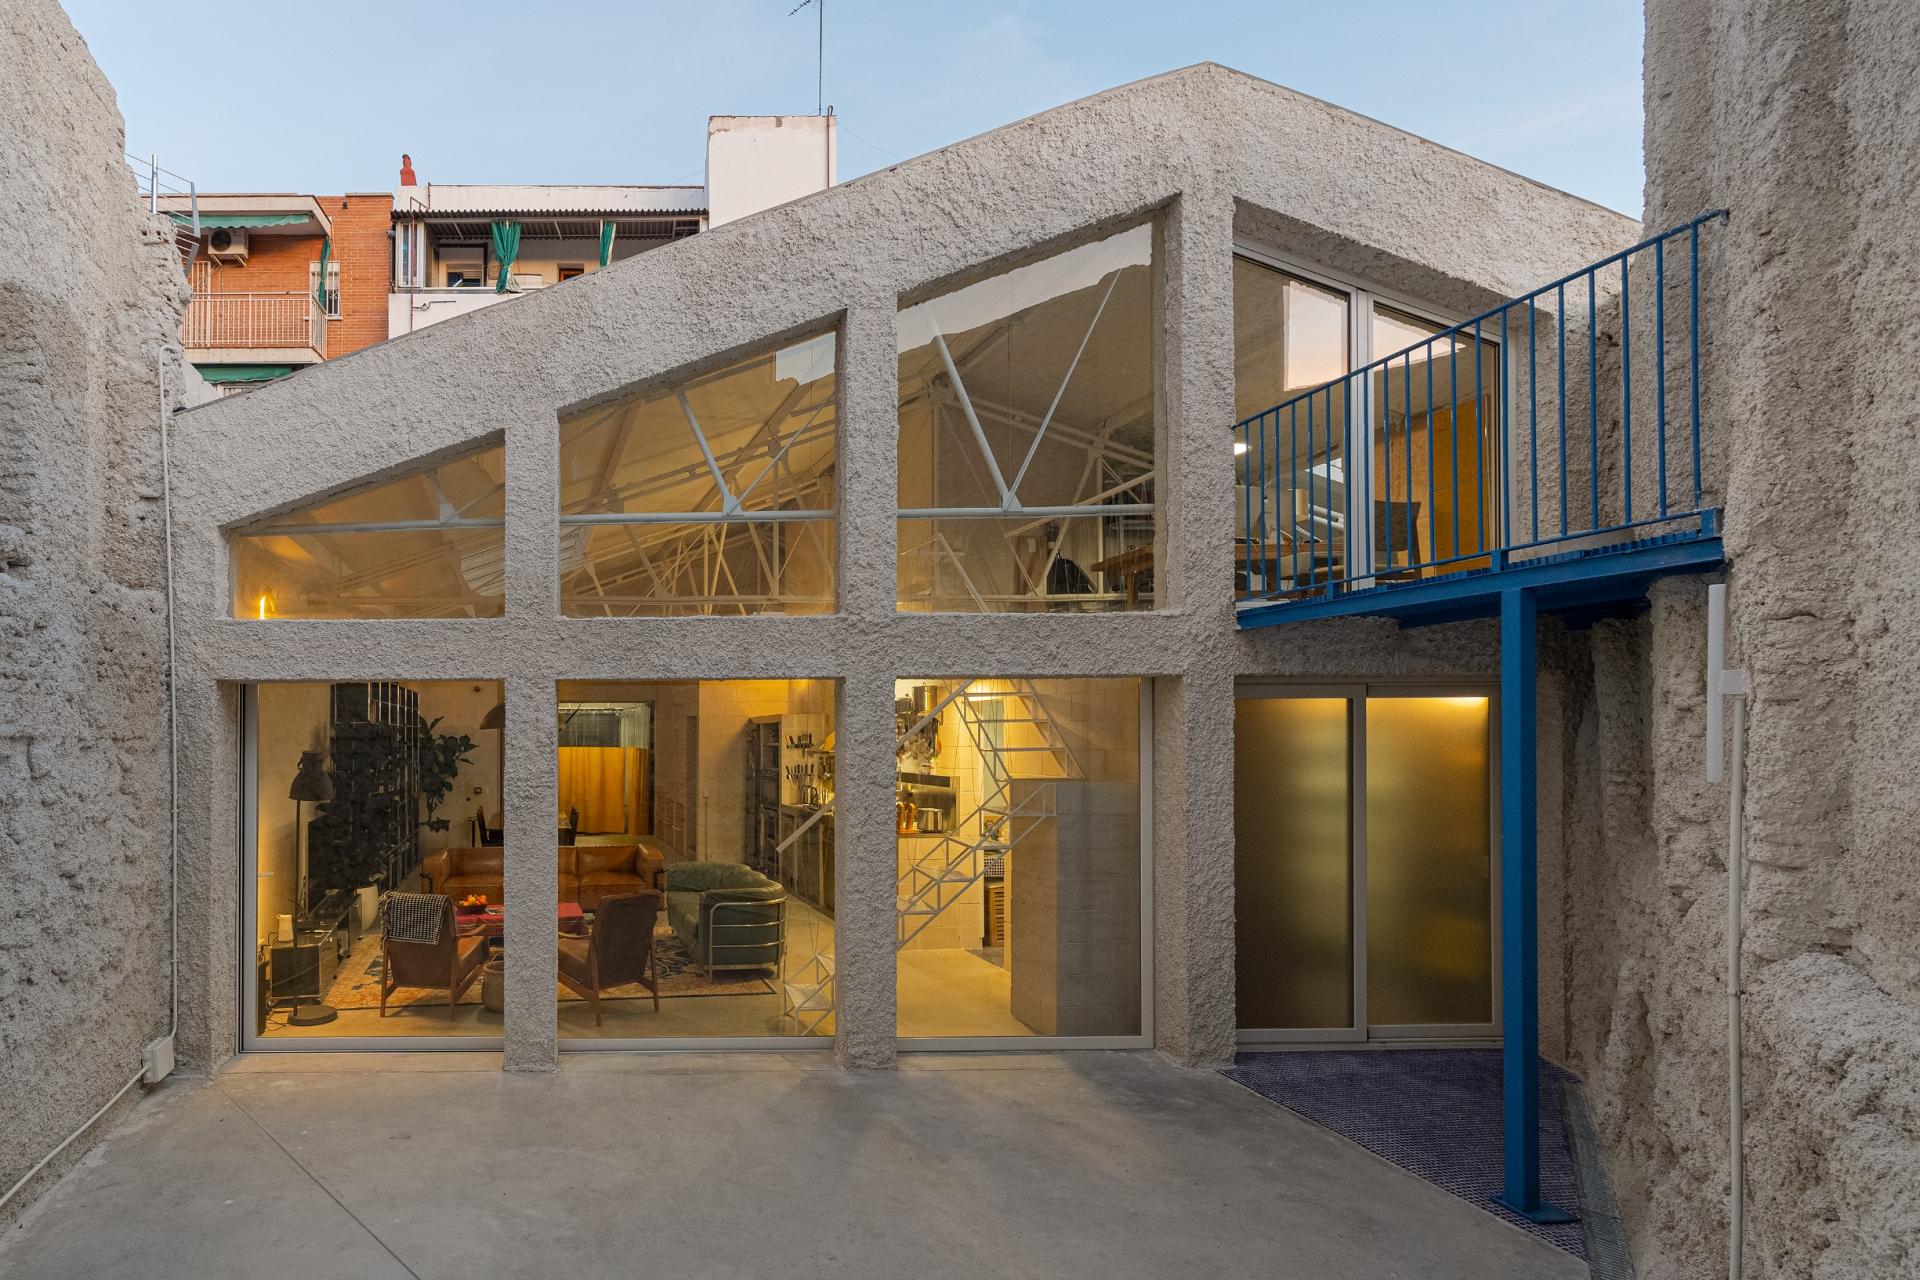 Blasón breathes and lives in Madrid’s industrial heritage